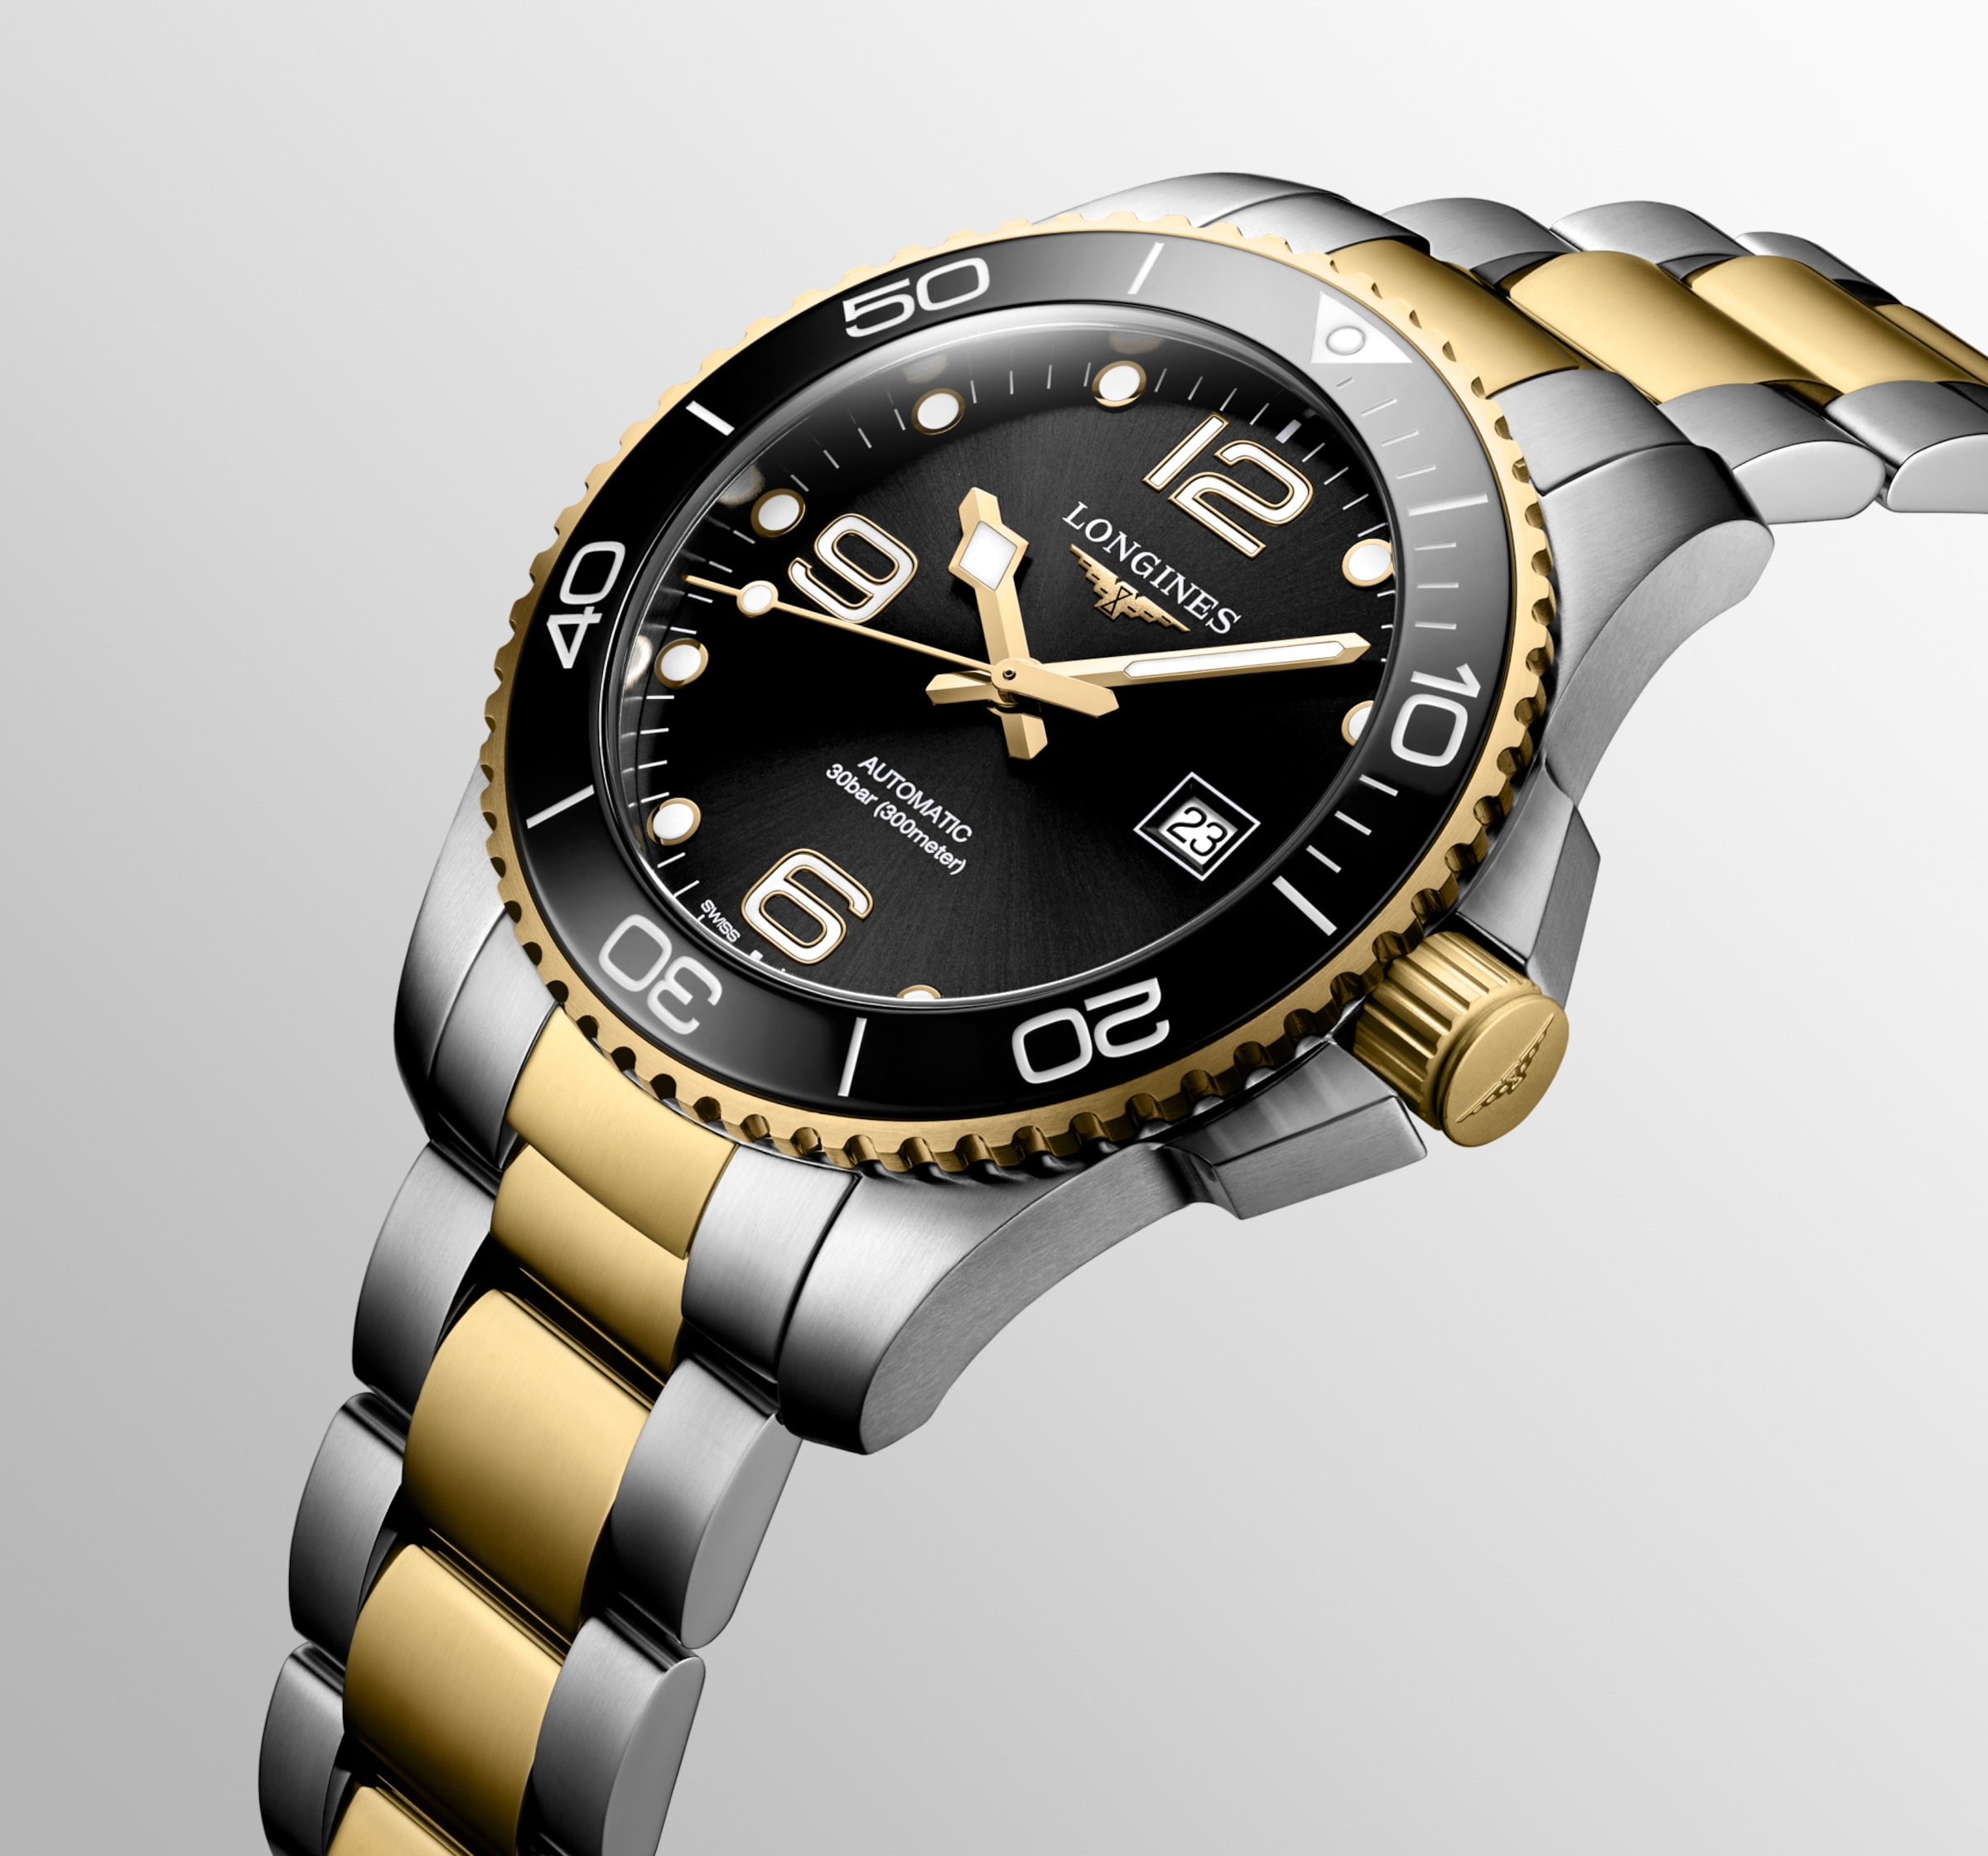 Longines HYDROCONQUEST Automatic Stainless steel and ceramic bezel Watch - L3.782.3.56.7